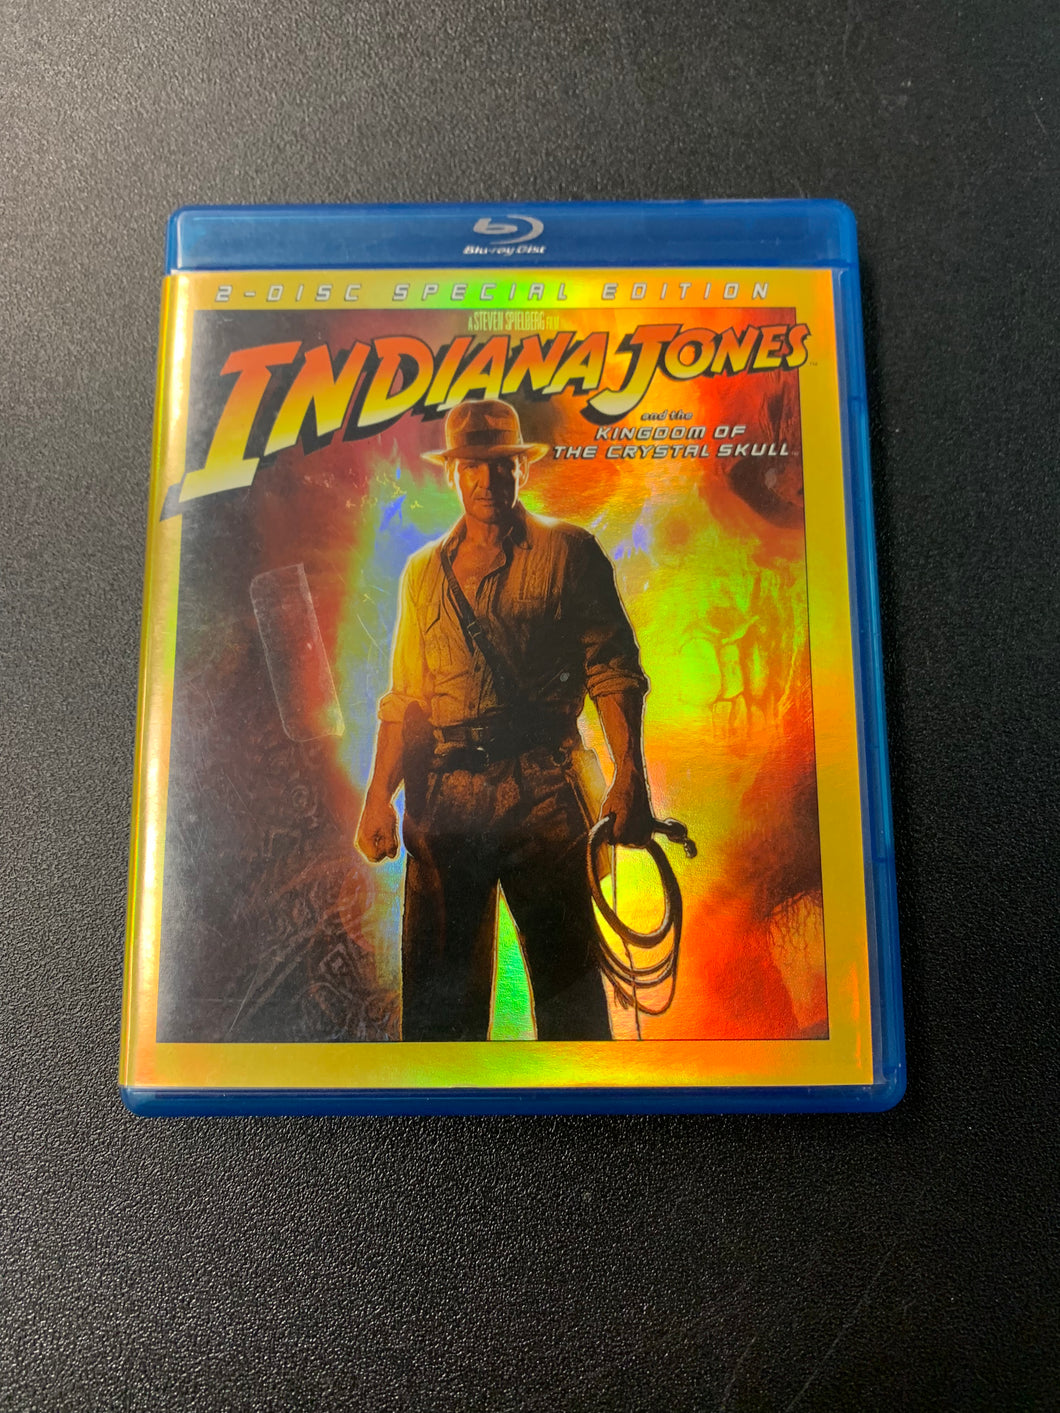 INDIANA JONES AND THE KINGDOM OF THE CRYSTAL SKULL 2 DISC SPECIAL EDITION BLU-RAY DVD PREOWNED